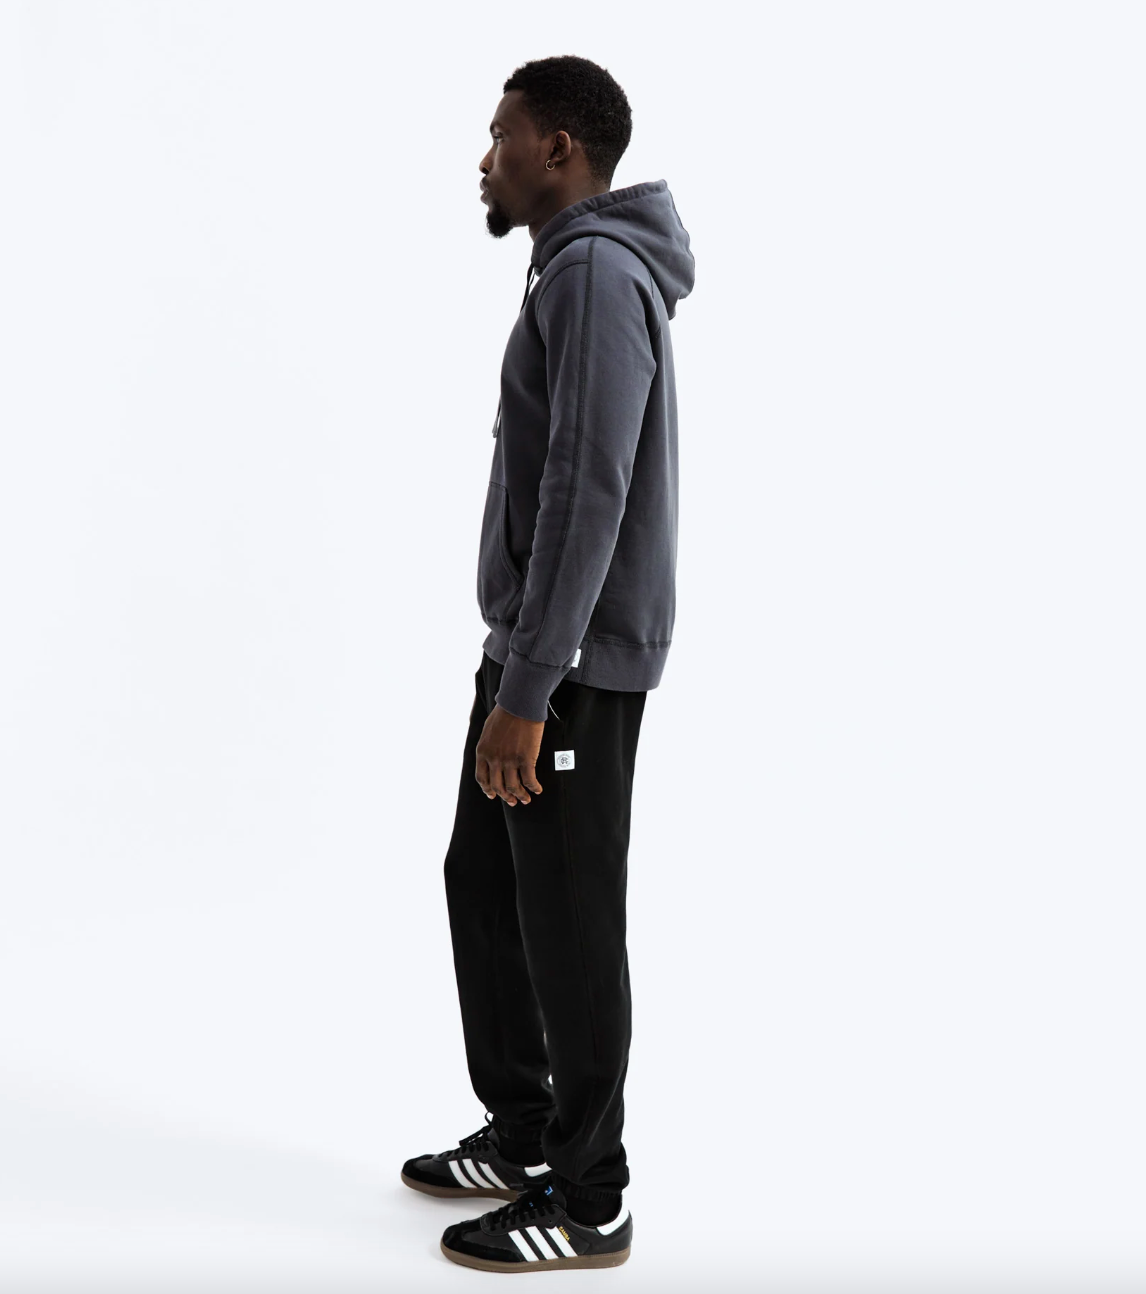 RC - Midweight Terry Pullover Hoodie Midnight SS23-Men's Sweatshirts-Yaletown-Vancouver-Surrey-Canada